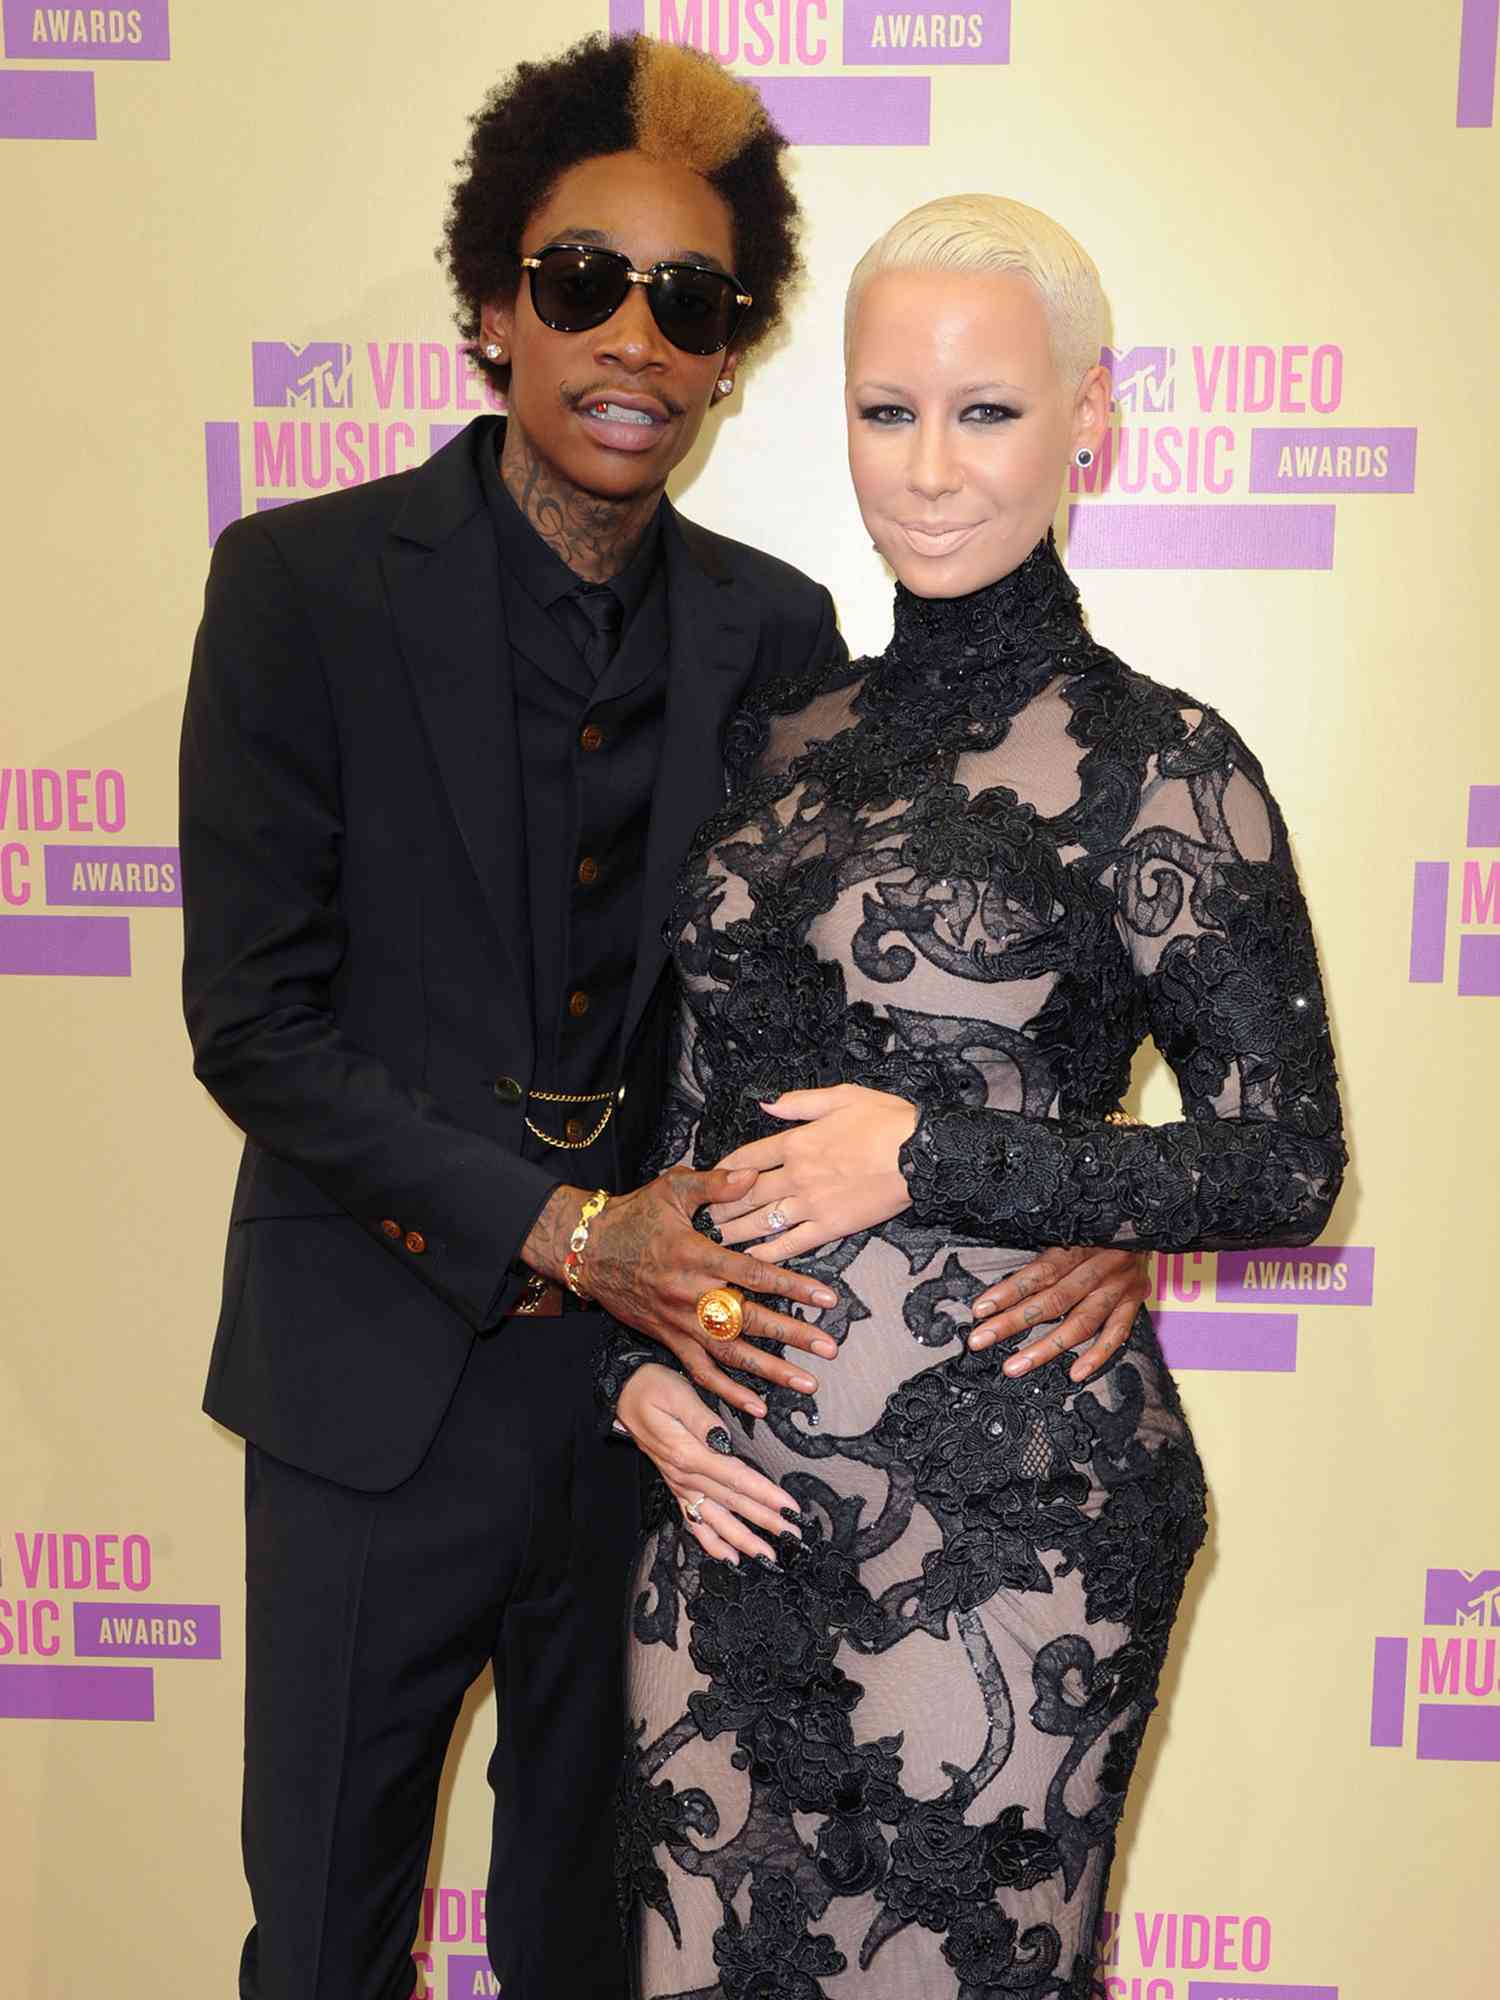 Wiz Khalifa and Amber Rose arriving at the MTV Video Music Awards at the Staples Centre, Los Angeles